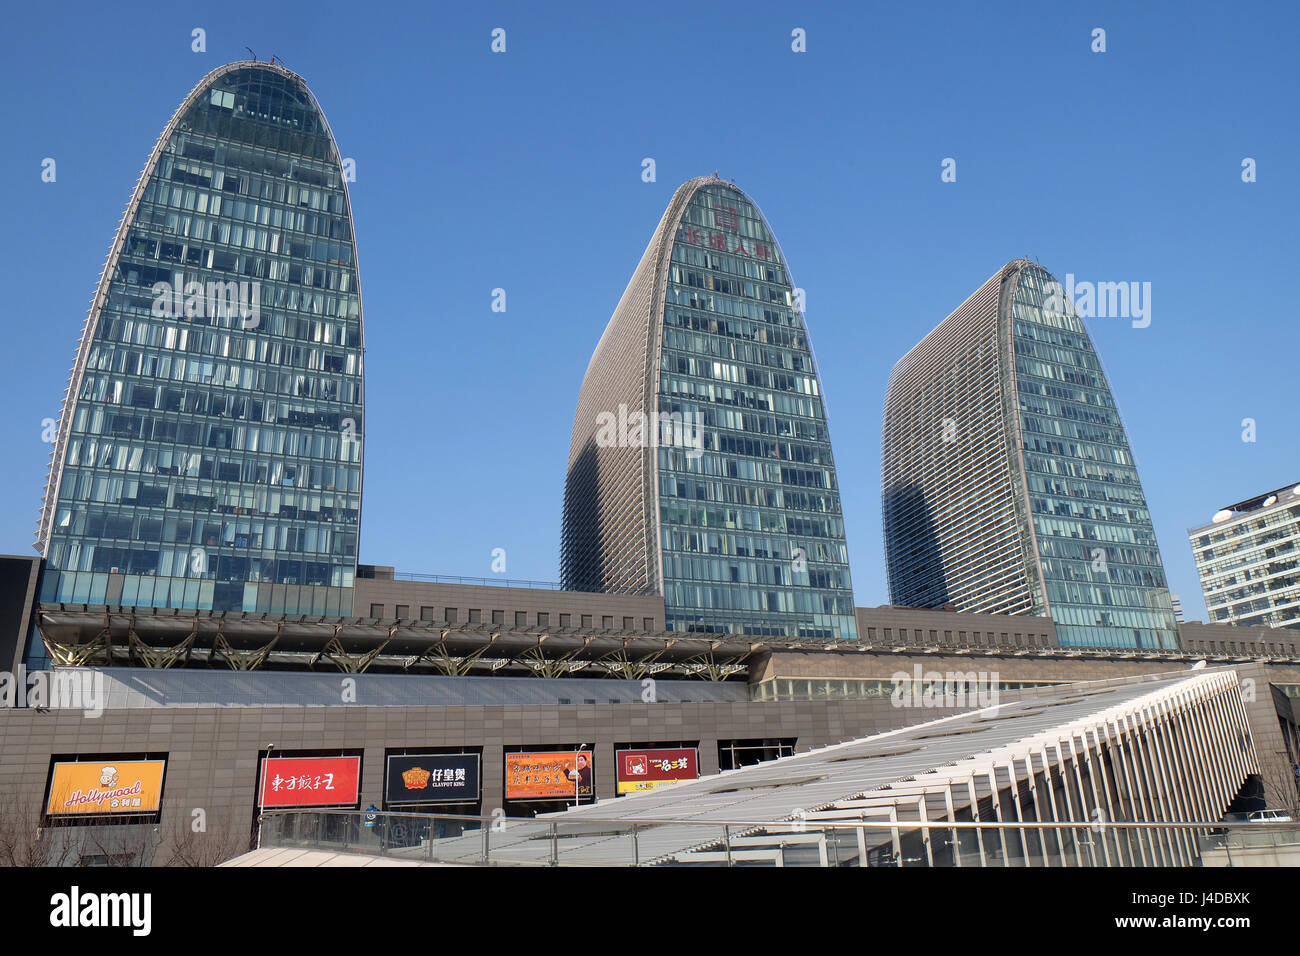 The Three Towers at Xihuan Square near Beijing North Train Station, Xizhimen district, Beijing, China, February 24, 2016. Stock Photo